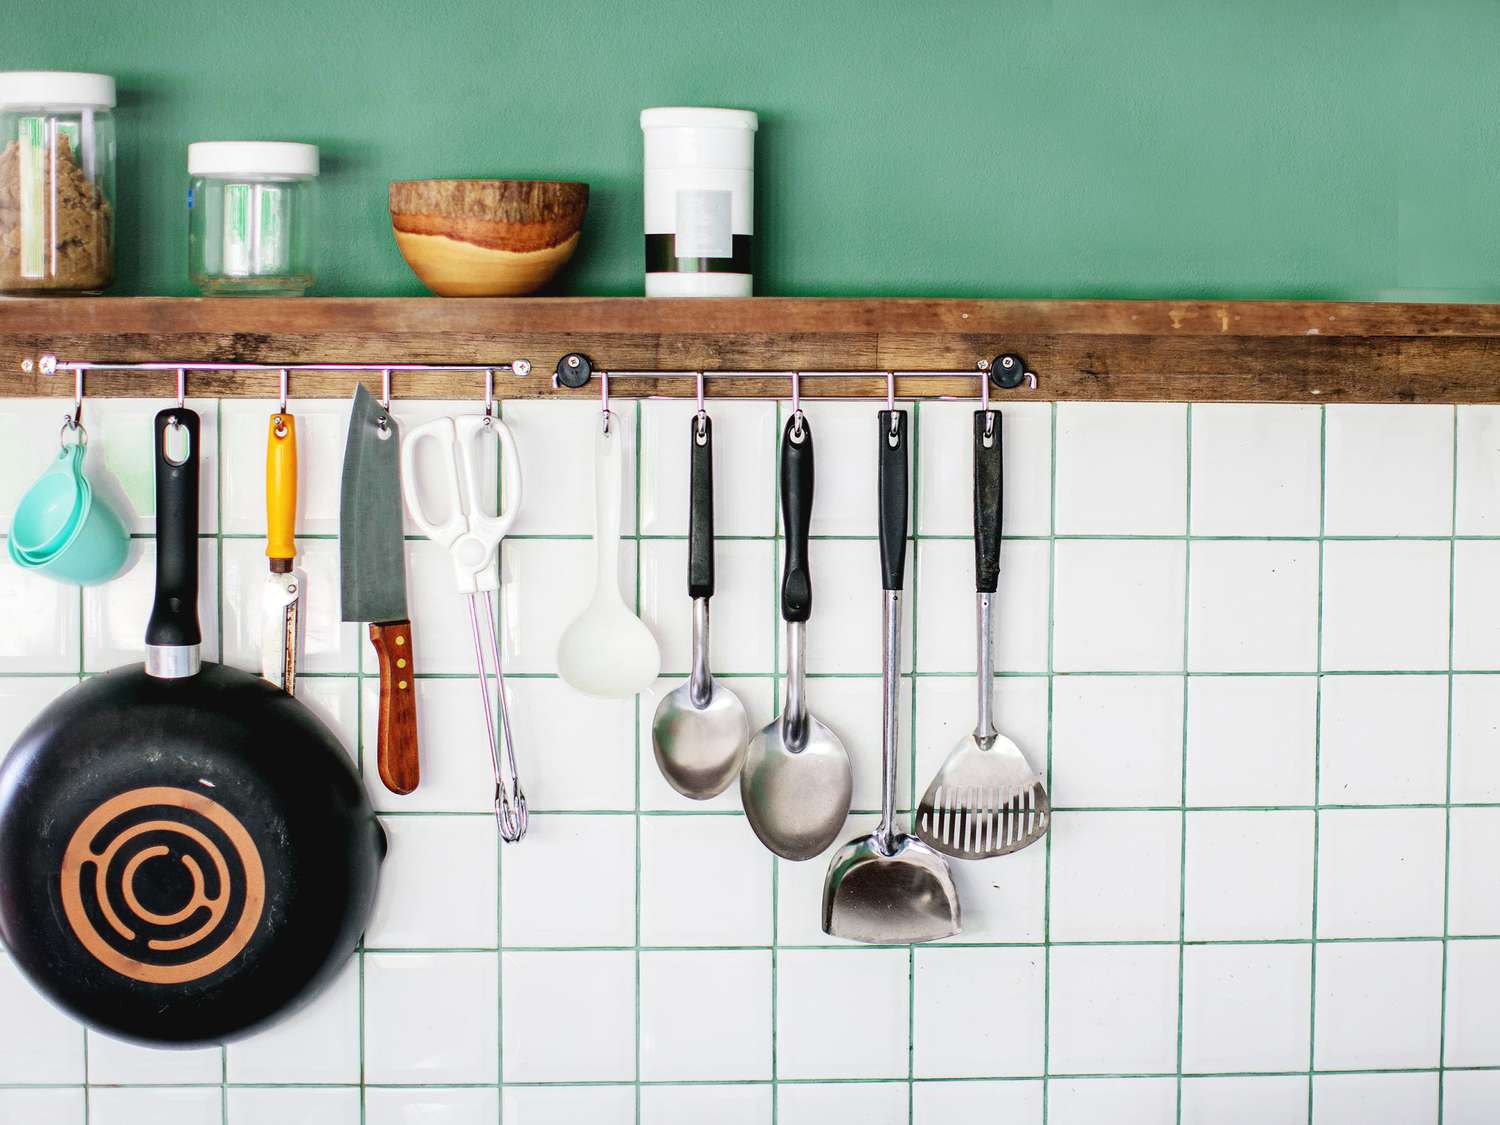 25 Kitchen Must Haves That Are Perfect for Small Spaces   Real Simple